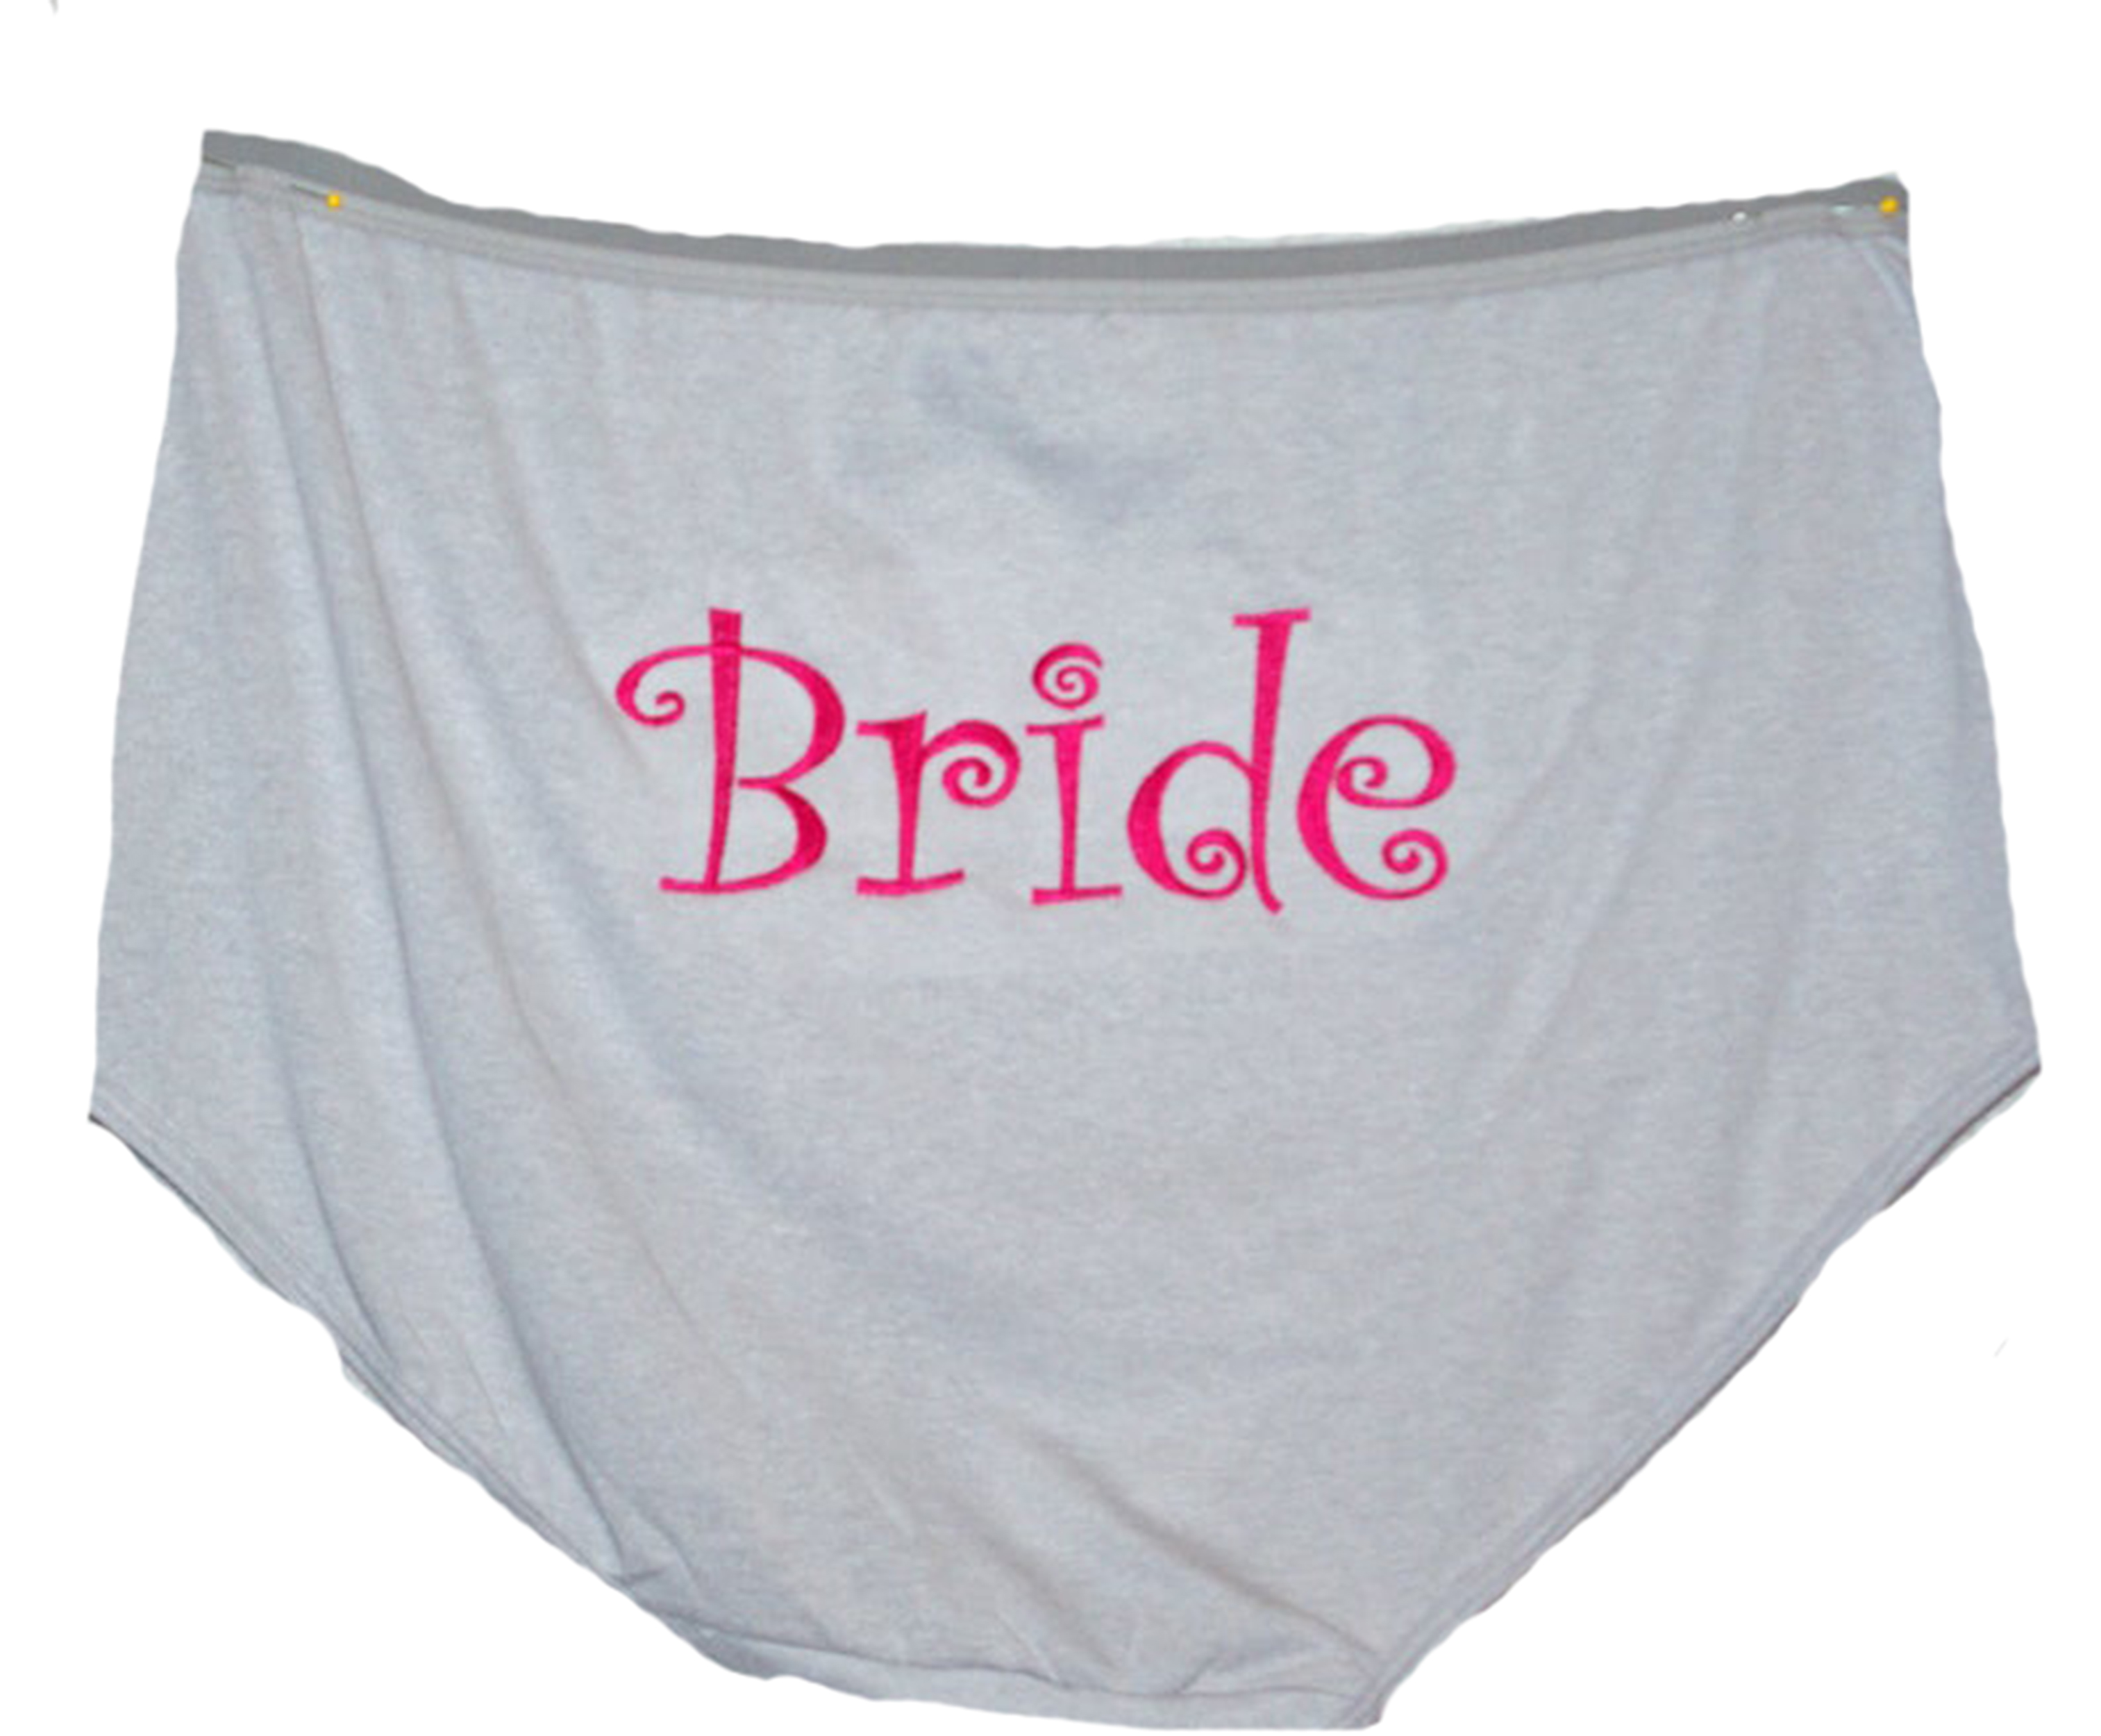 These Are My Big Girl Granny Panties Embroidered Monogrammed Ugly Gag Gift  Funny Extra Large Size Panties Ready to Ship TODAY AGFT 052 